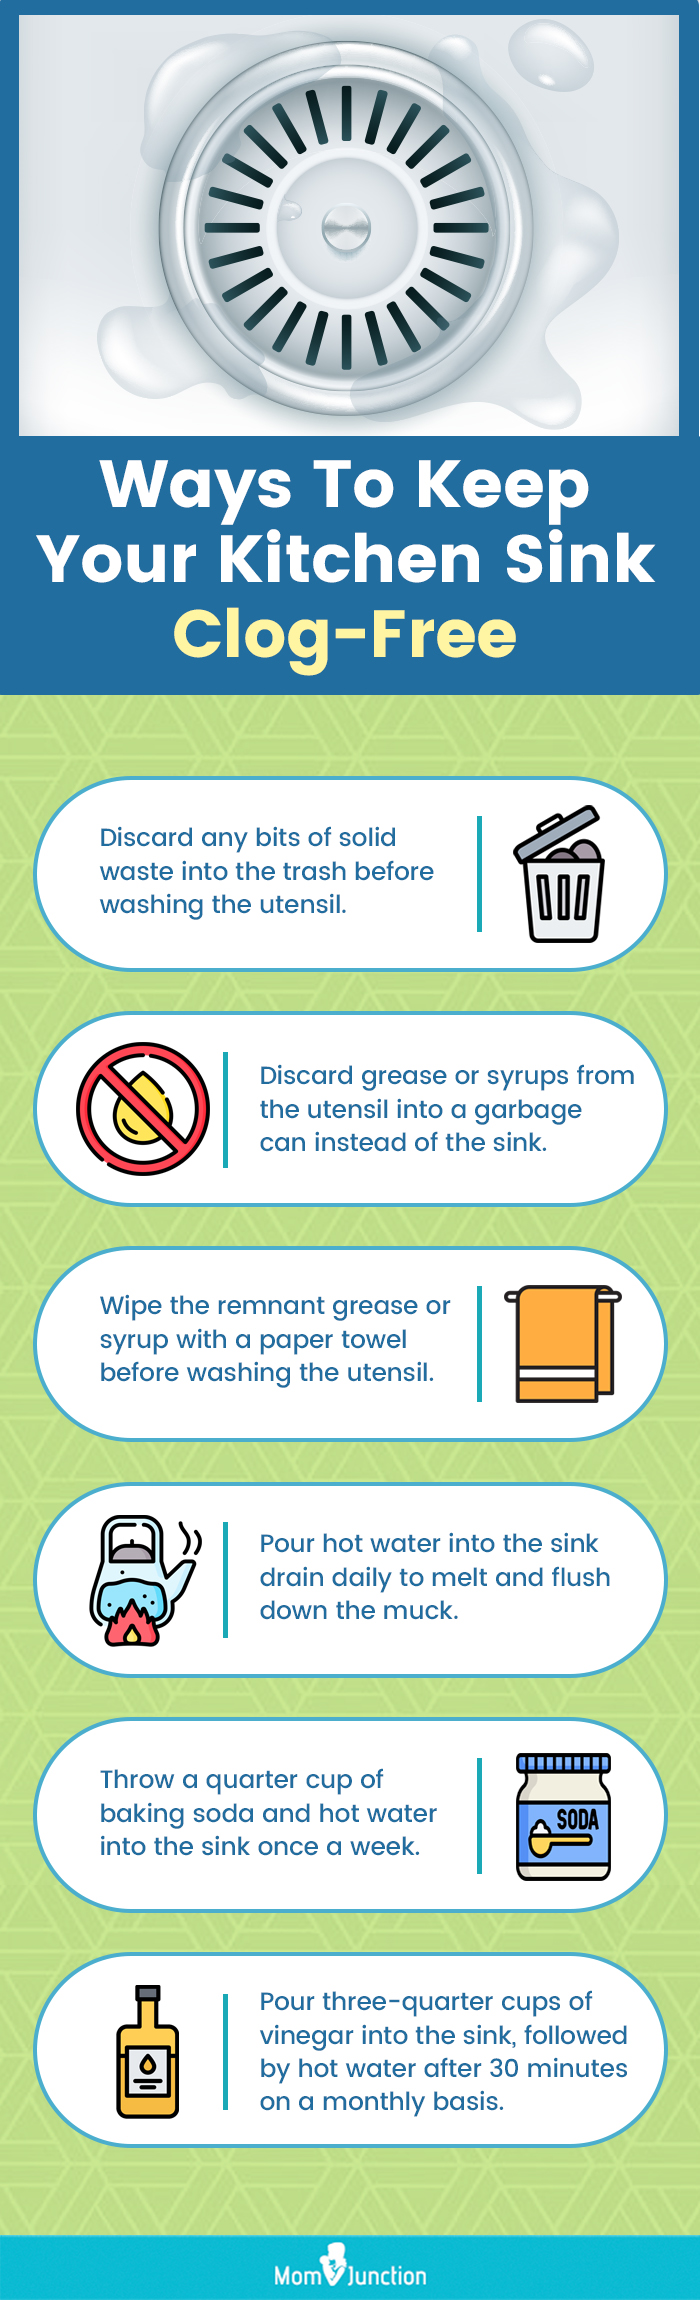 Ways To Keep Your Kitchen Sink Clog Free (Infographic)